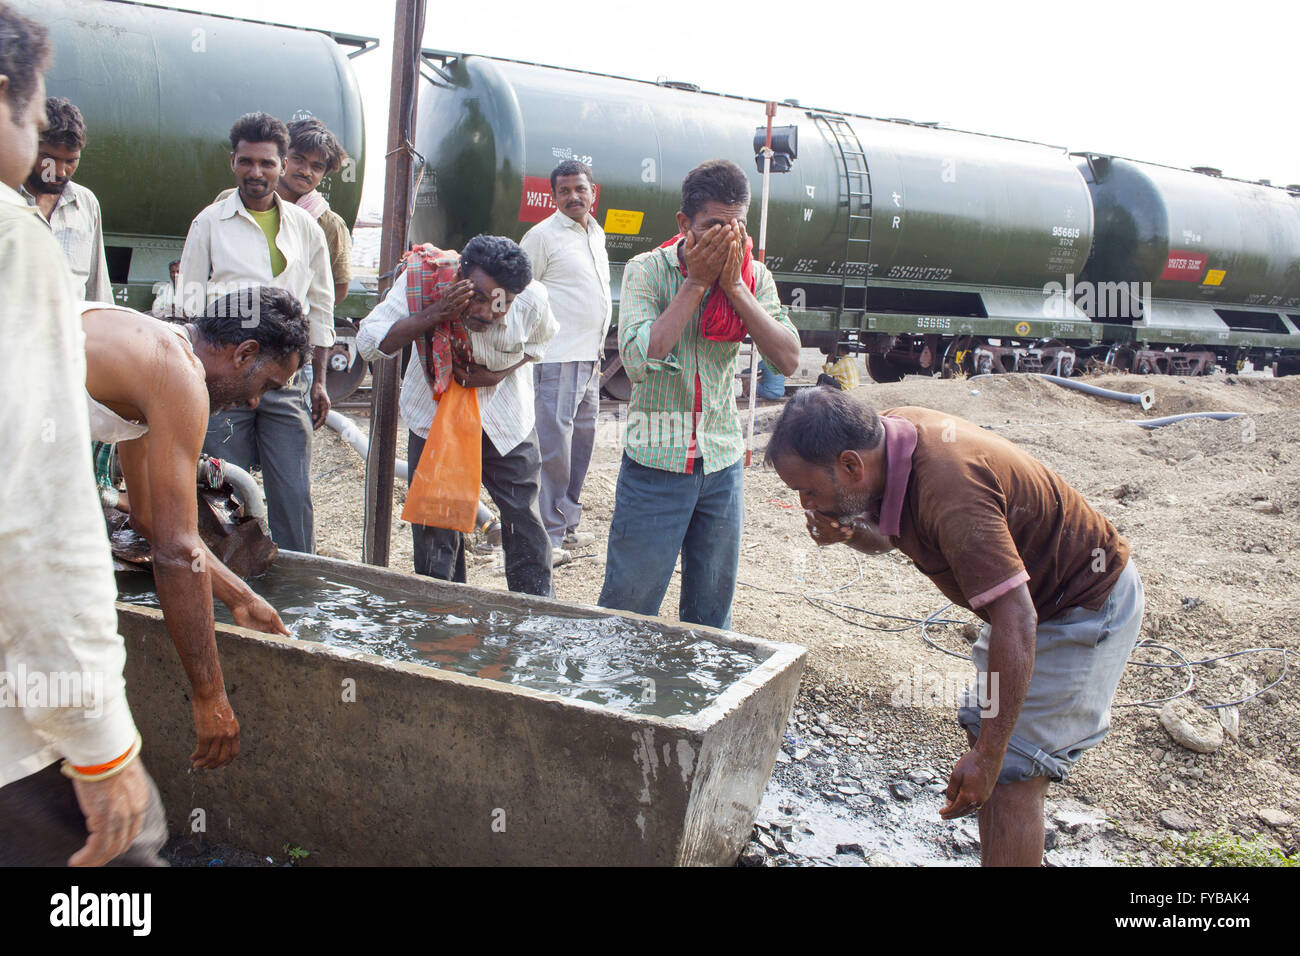 Latur, Maharashtra. 20th Apr, 2016. 20 April 2016 - Latur - INDIA.After completing the 350 kms journey from Miraj, The 50 Wagon Water train arrives at Latur with much needed drinking water. © Subhash Sharma/ZUMA Wire/Alamy Live News Stock Photo